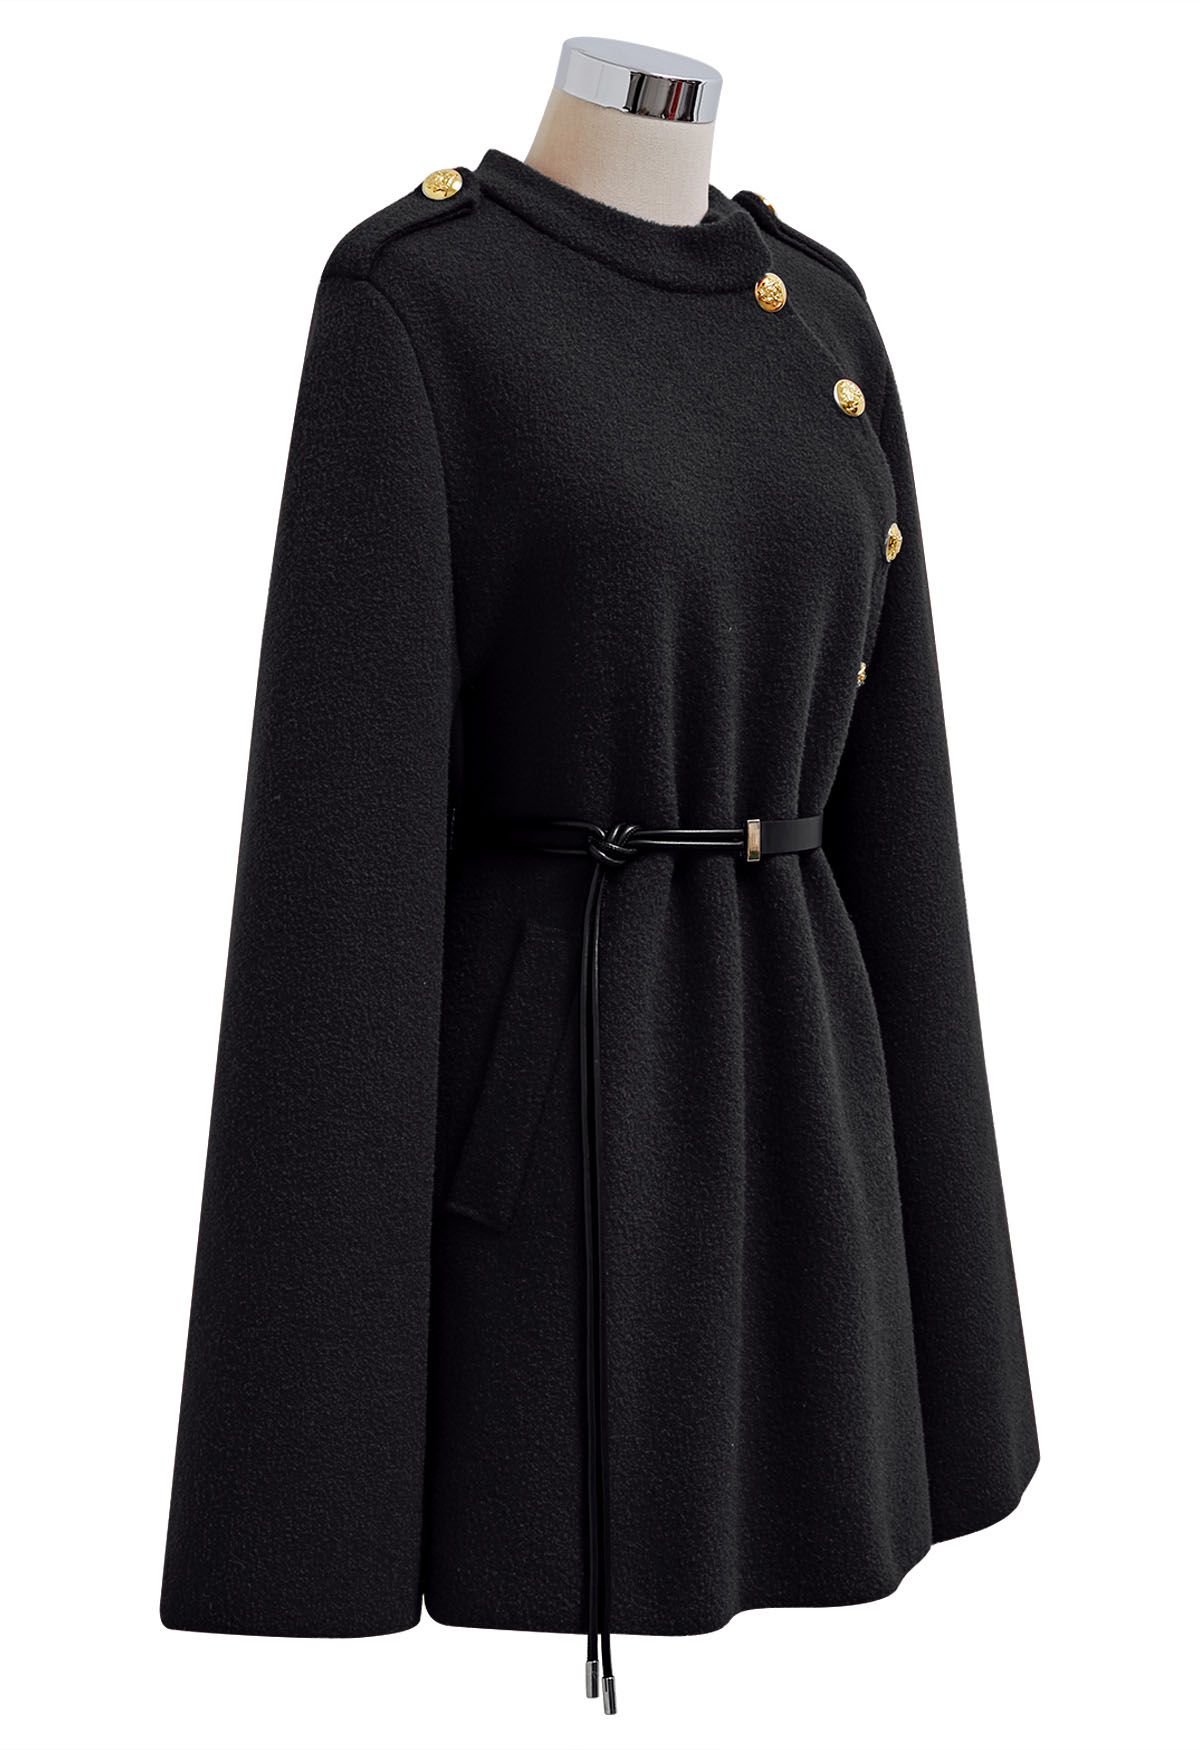 Golden Button Belted Cape Coat in Black